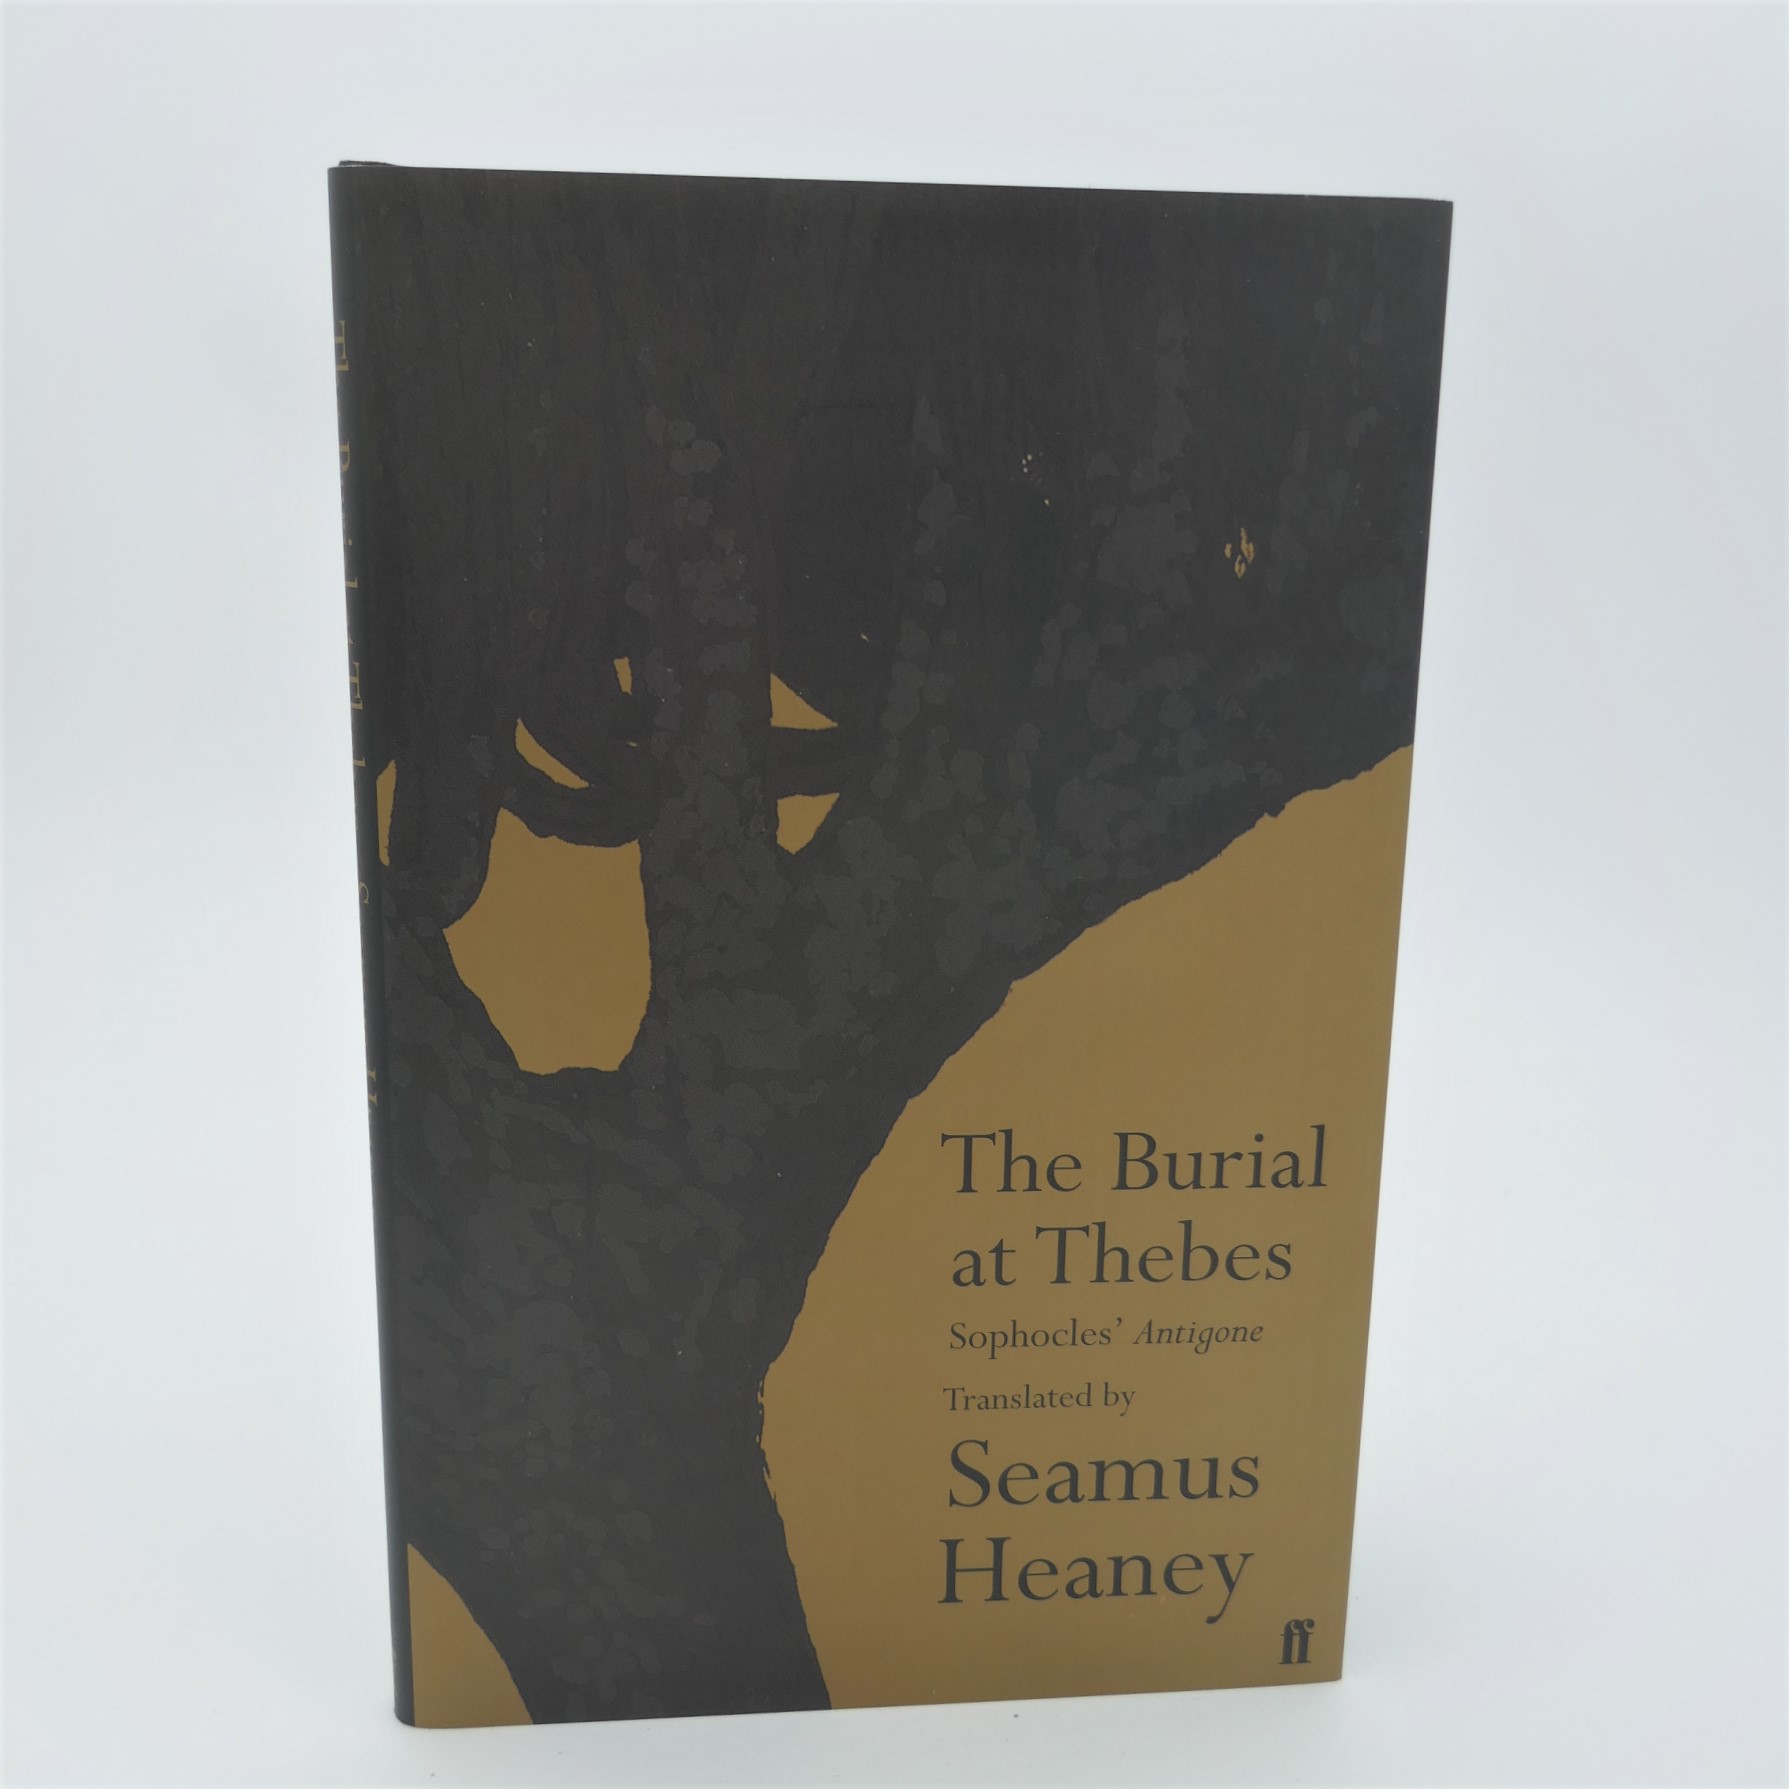 The Burial at Thebes. Signed Copy (2004) - Ulysses Rare Books